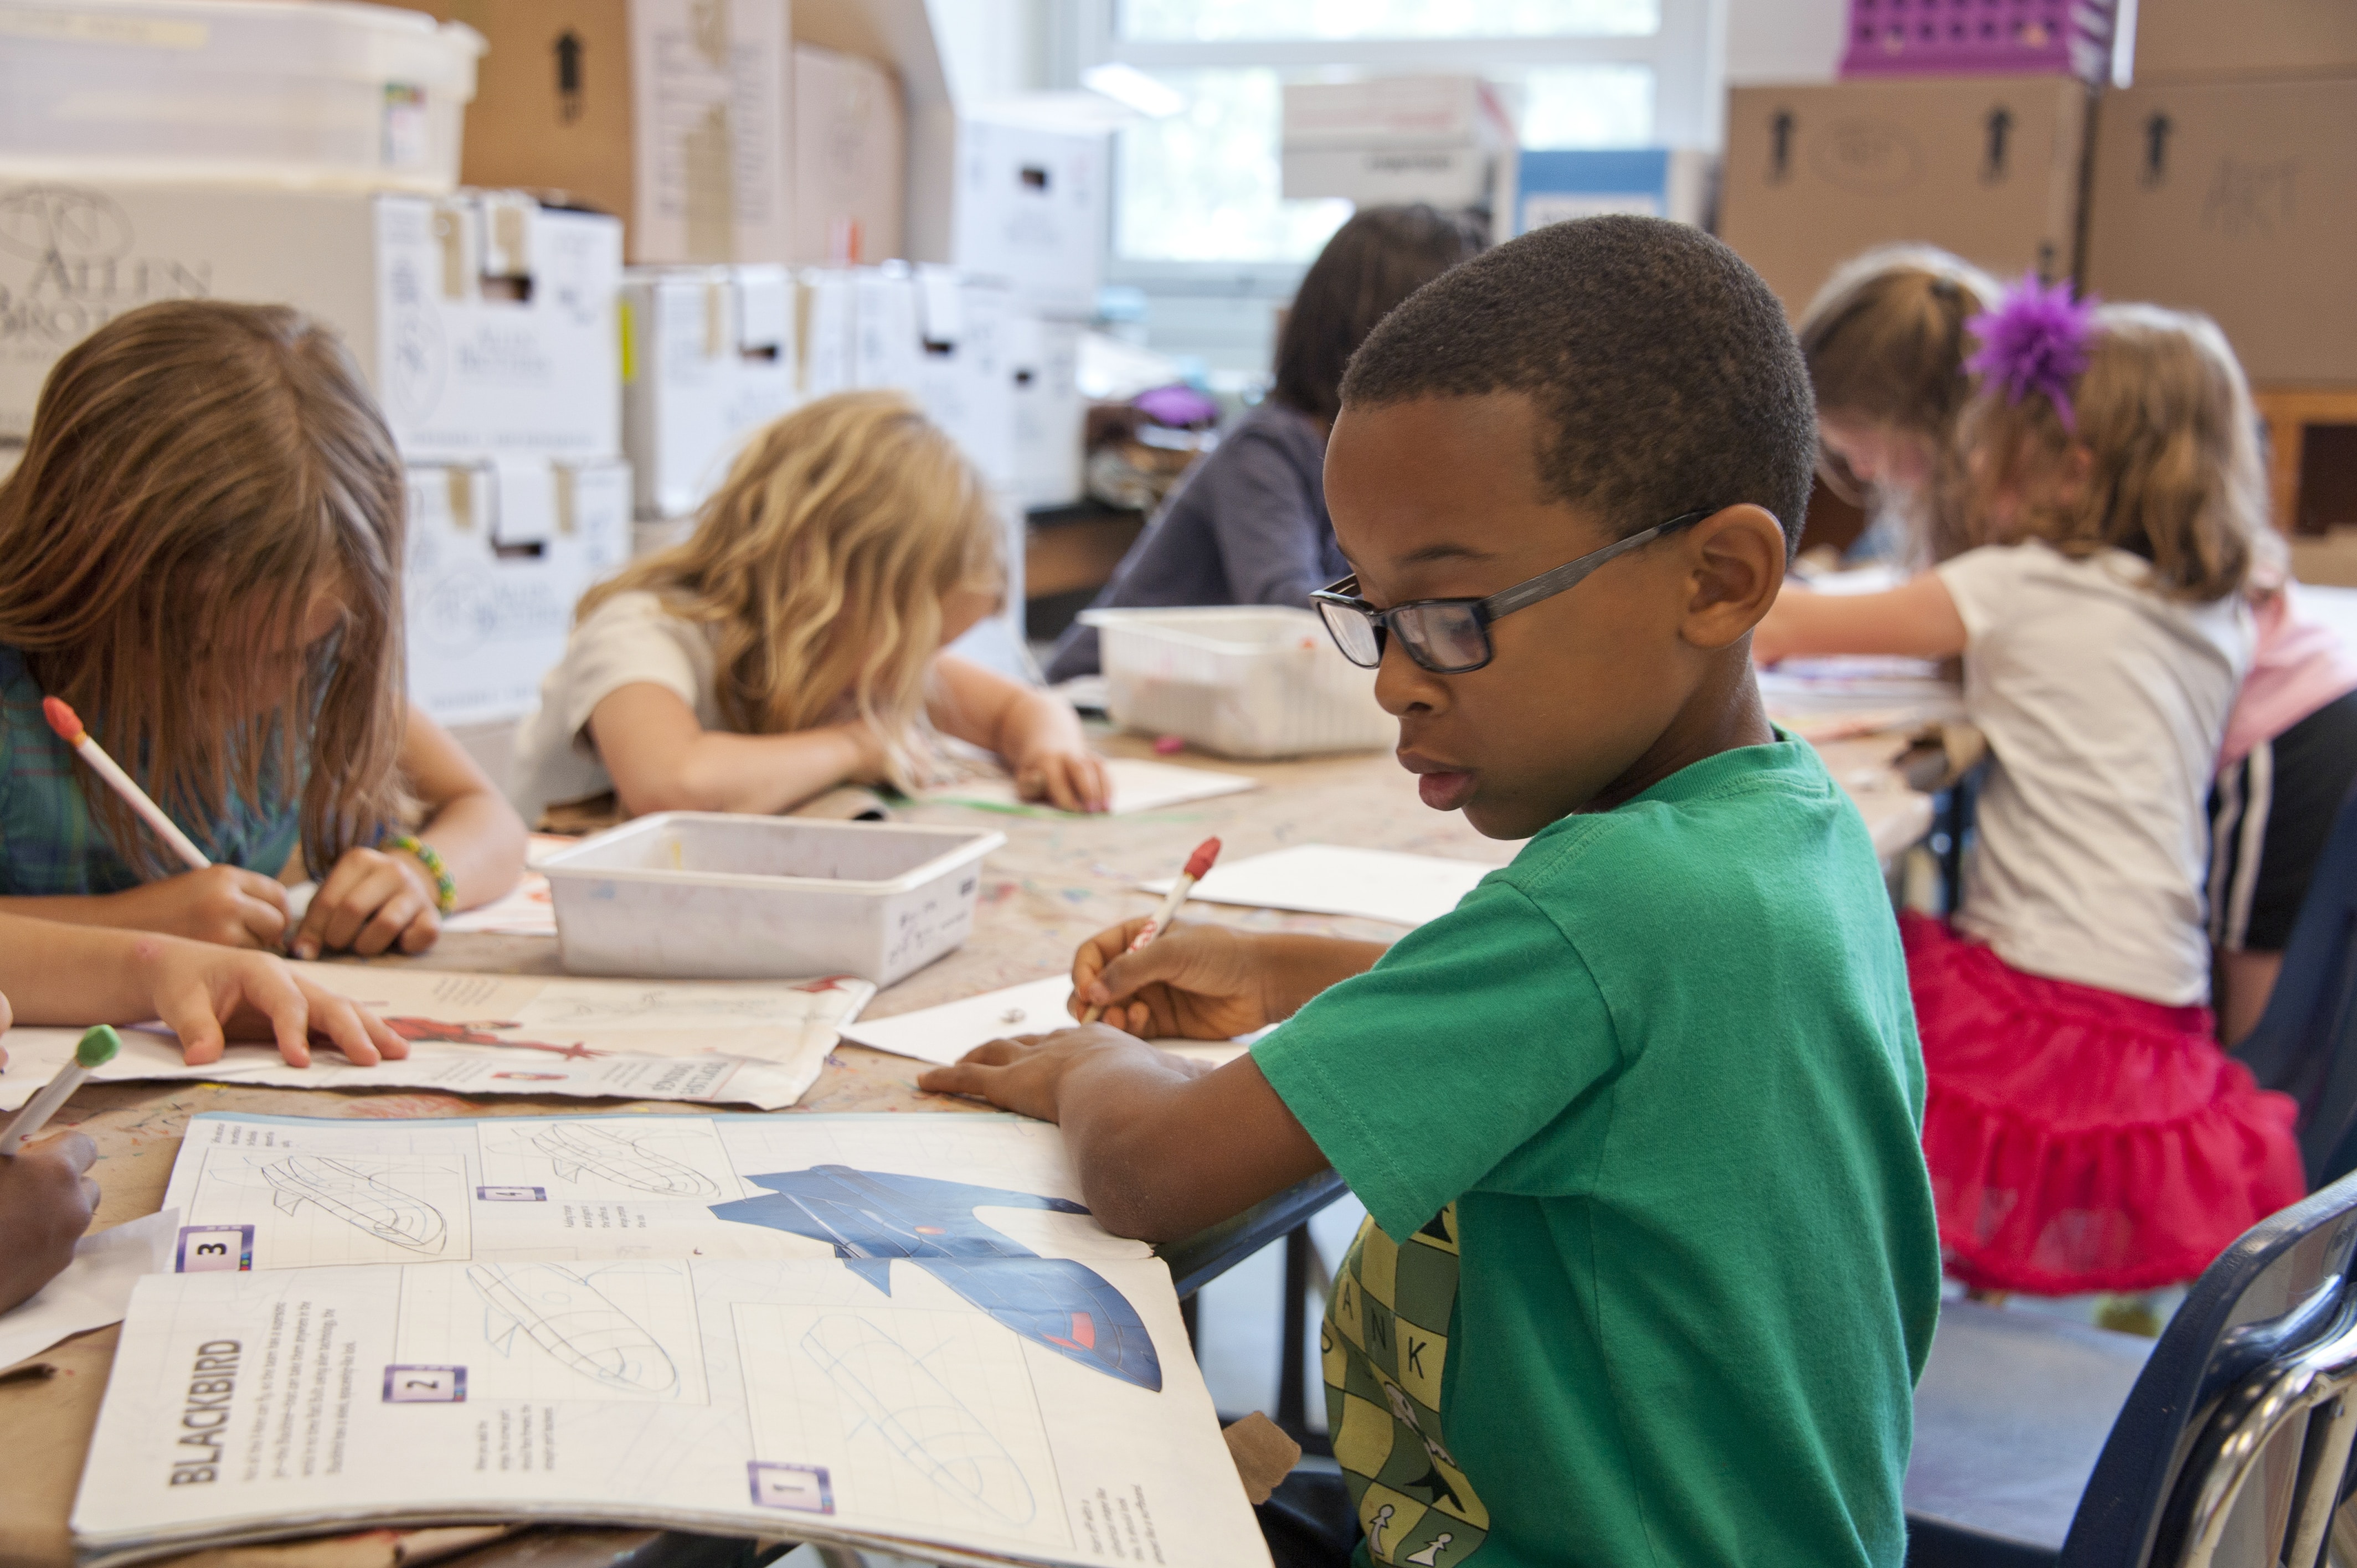 Stock image: a child works on a worksheet at a table with other children in a classroom setting.